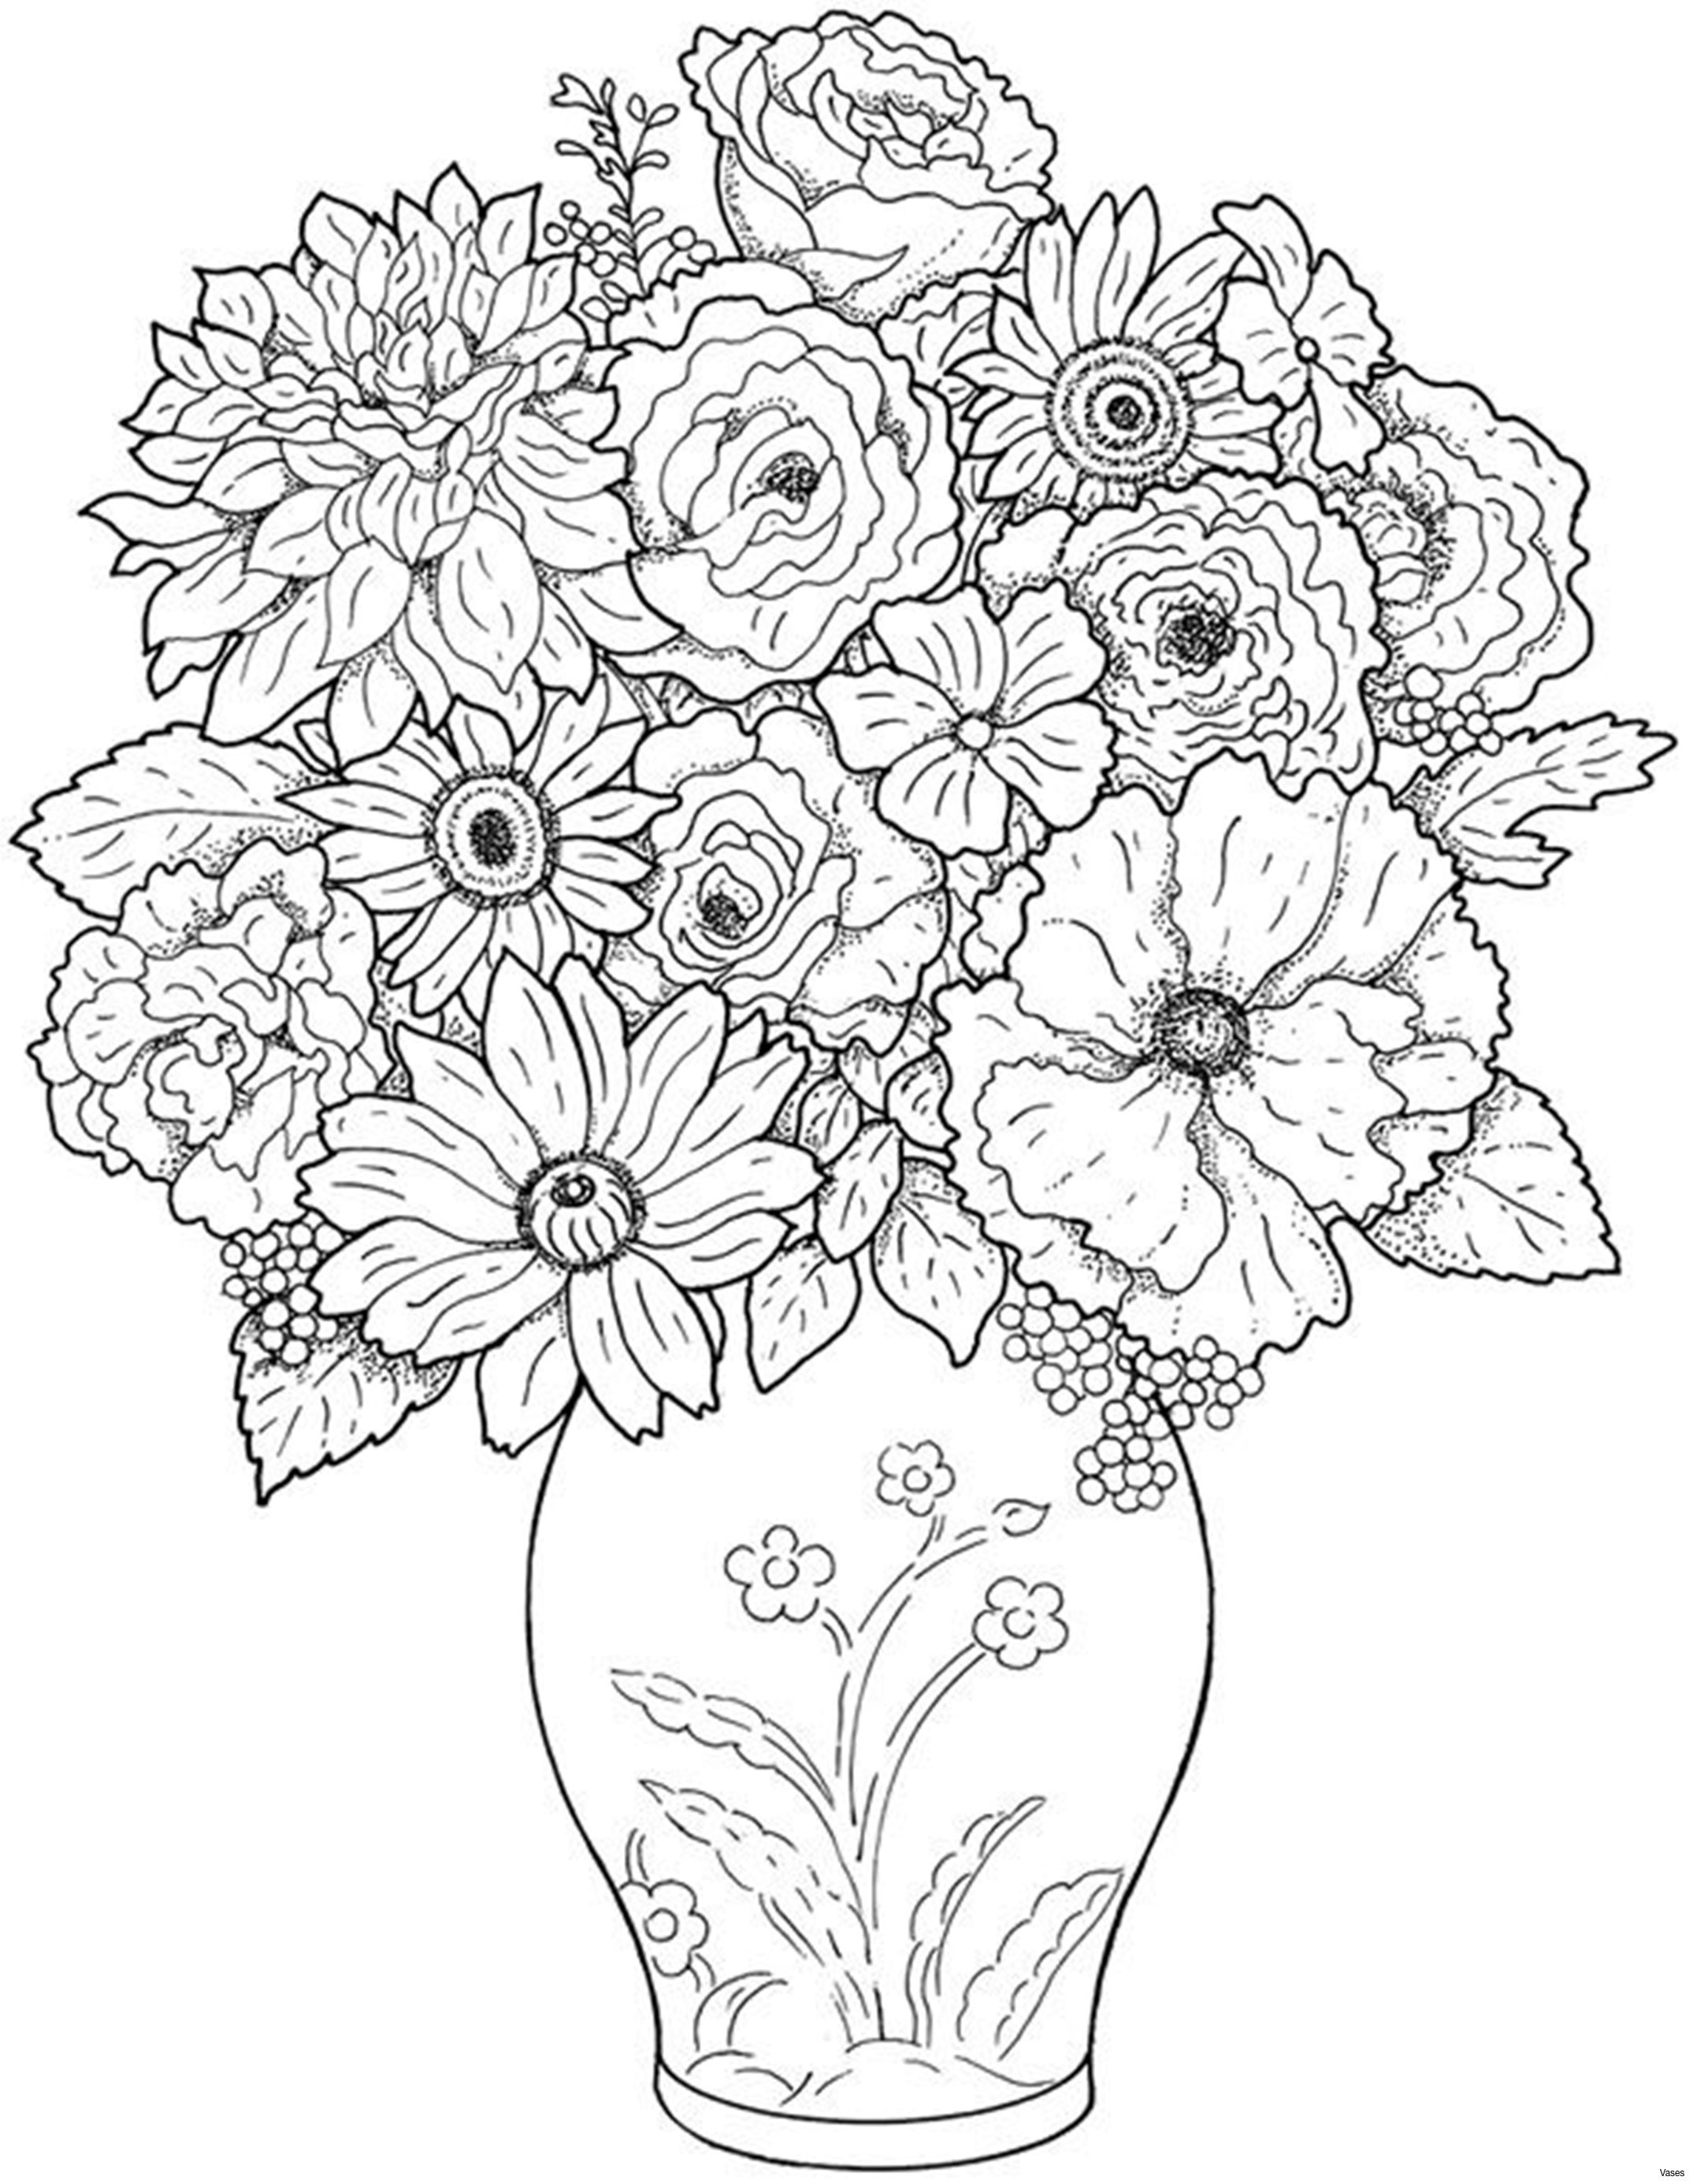 29 Unique Pictures Of Roses In A Vase 2024 free download pictures of roses in a vase of new gray flowers yepigames me within cool vases flower vase coloring page pages flowers in a top i 0d